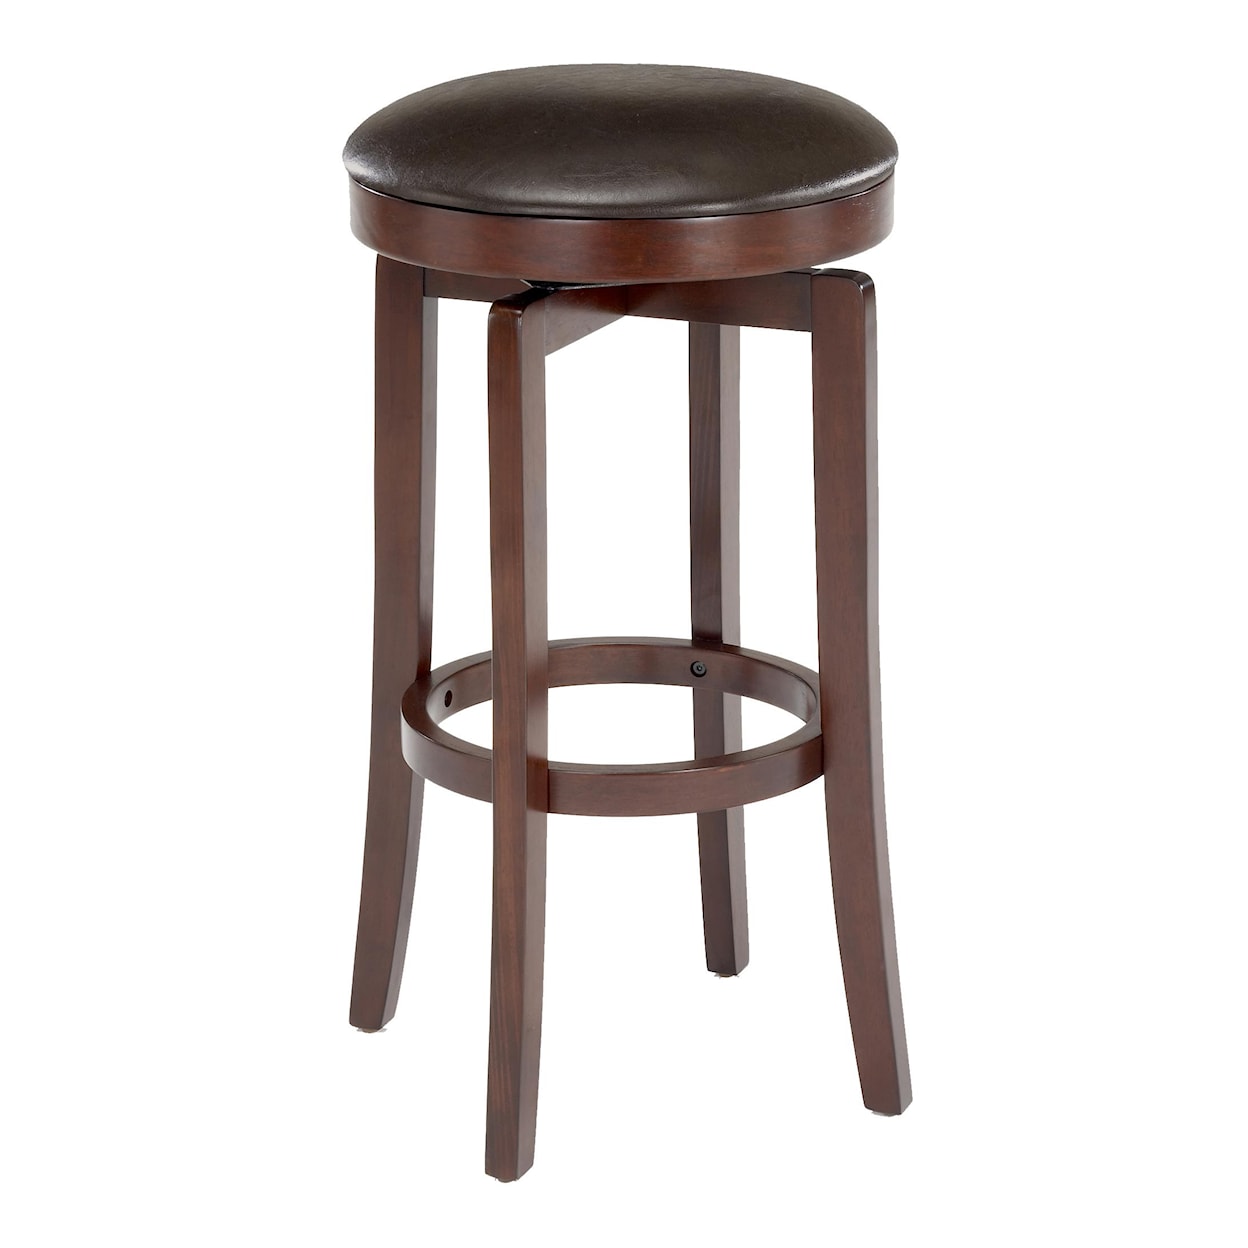 Hillsdale Backless Bar Stools 25" Malone Backless Counter Stool